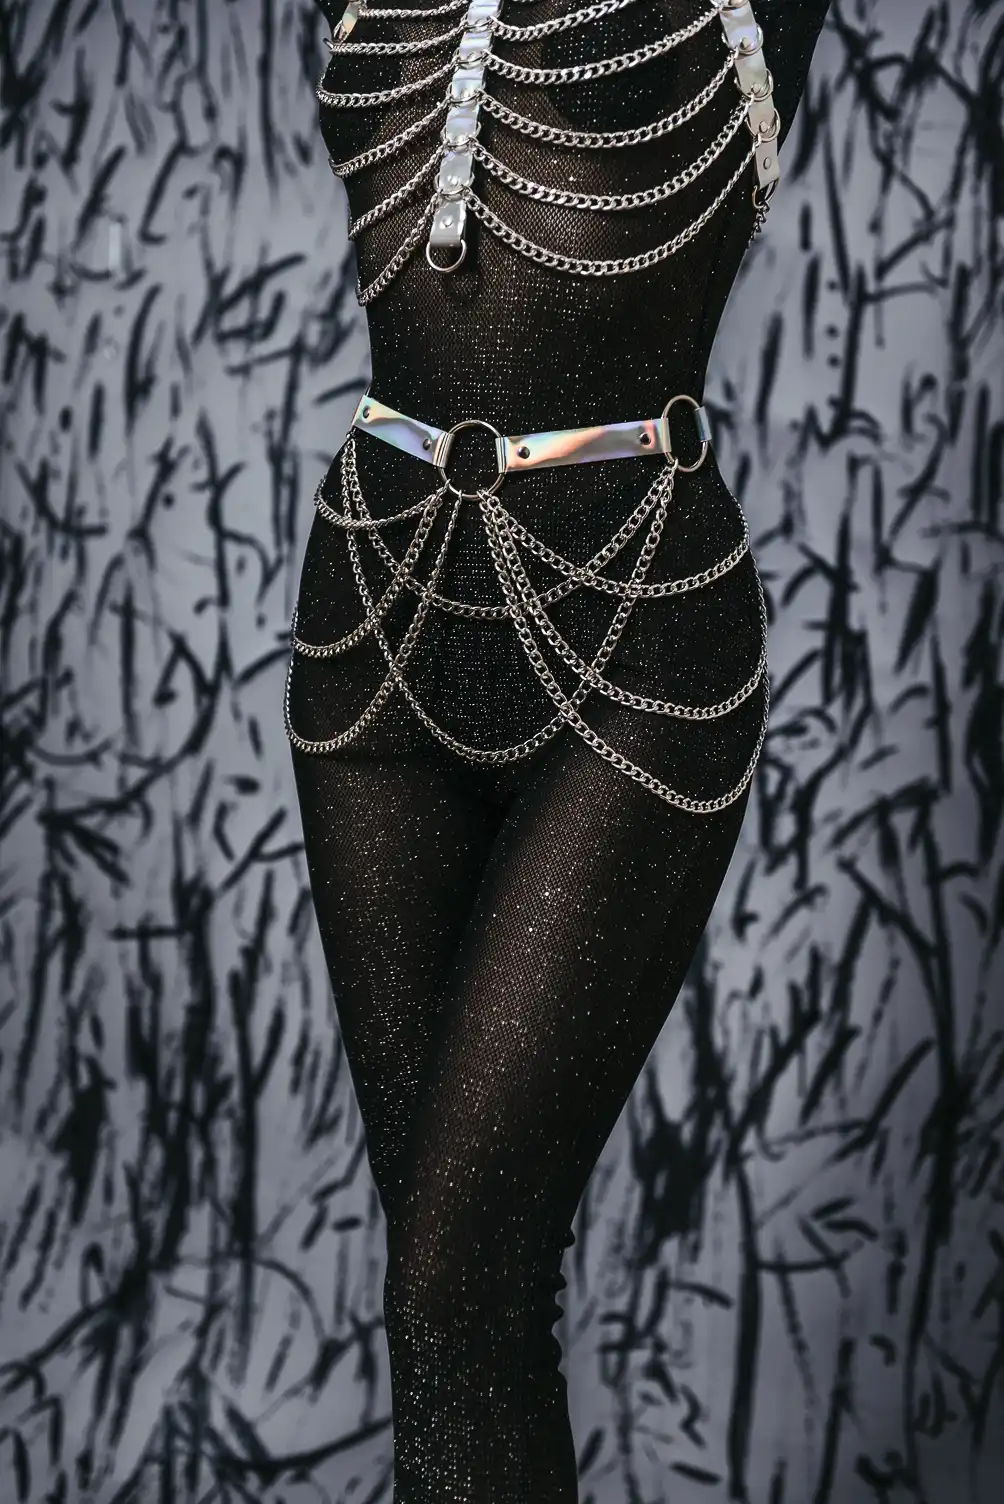 Handmade Alien leather belt with chains. High-end natural Italian leather with hologram color.